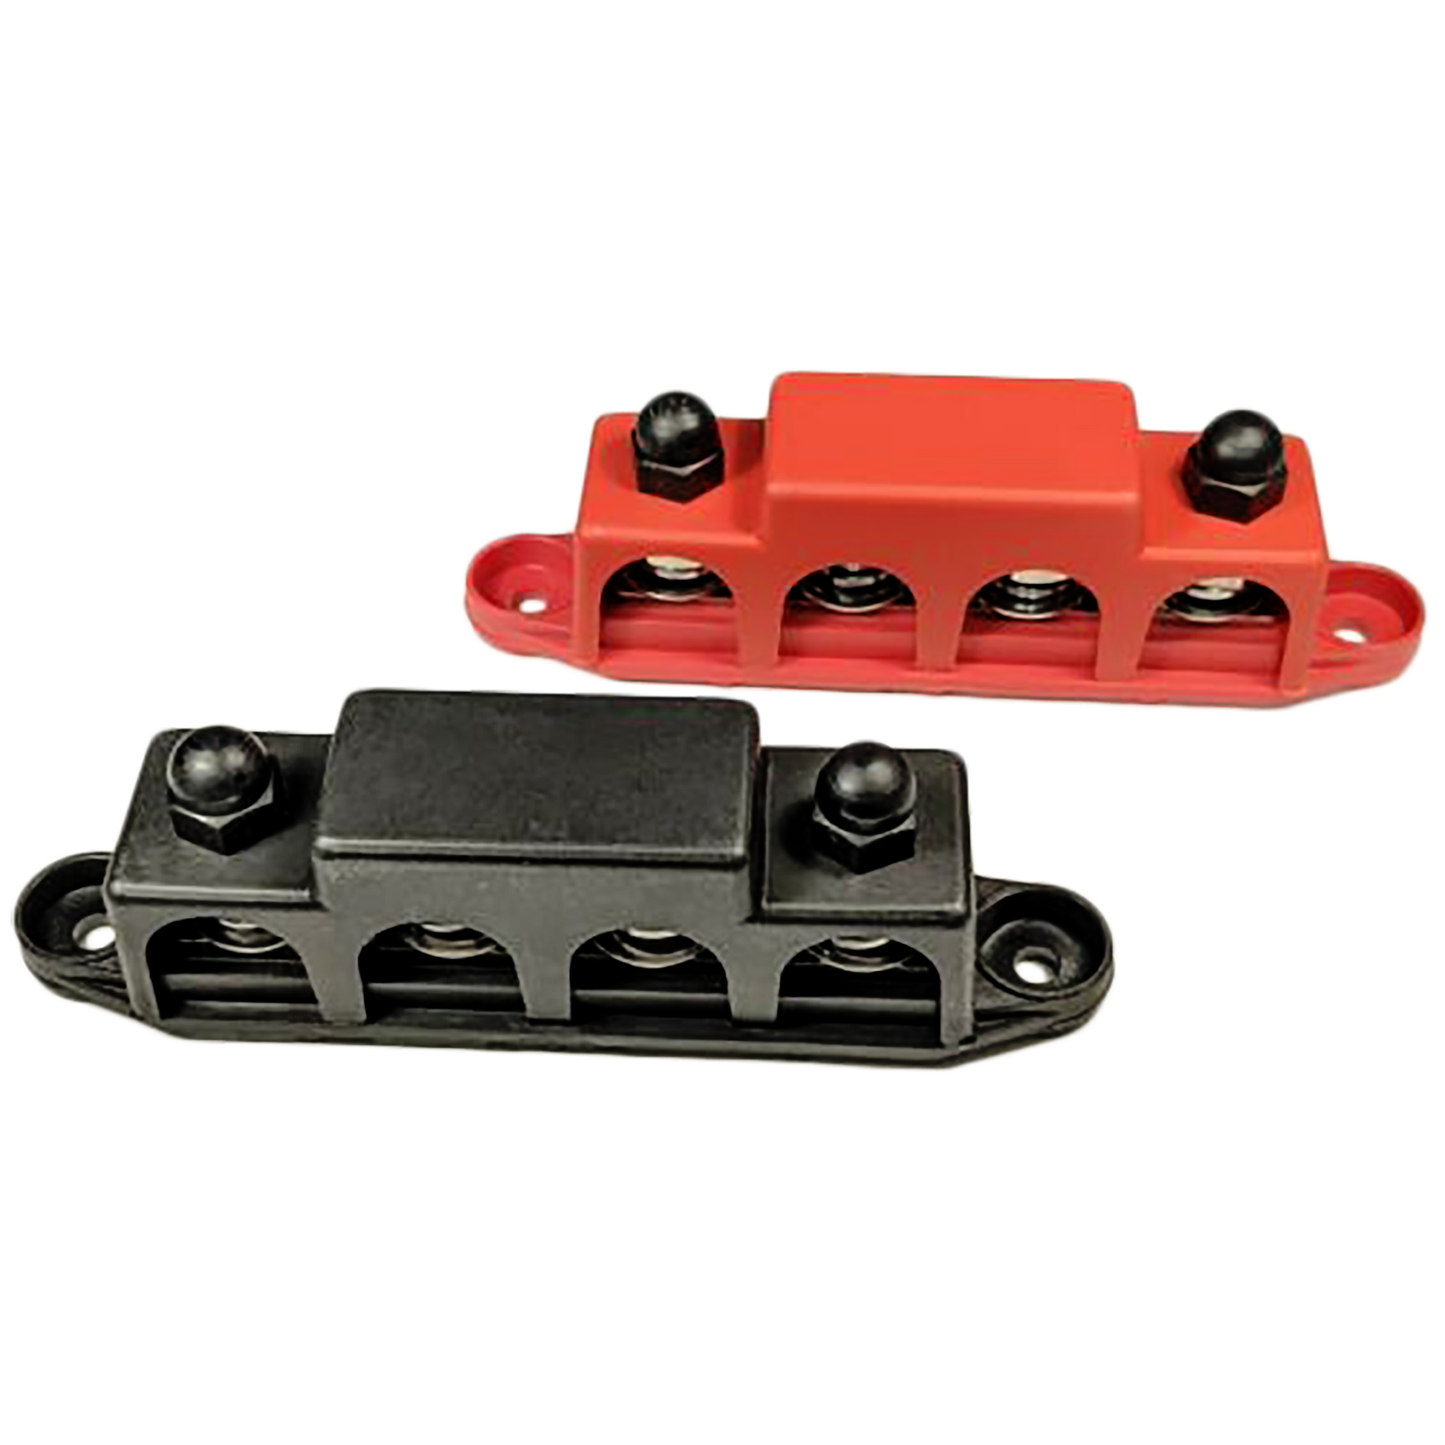 4 Post Busbar Bus Bar Power Distribution 12V 250A 3/8 in. Red and Black Pair